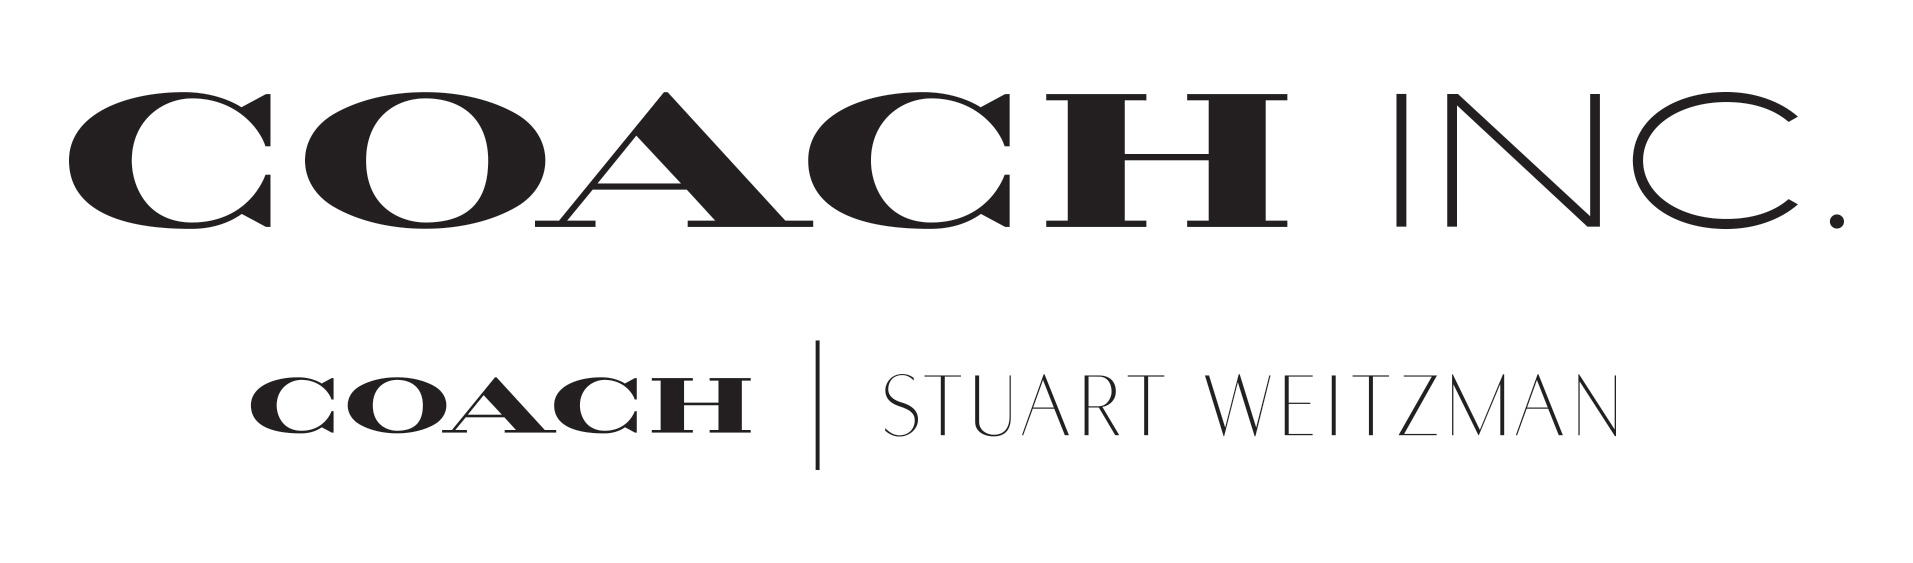 Coach, Inc. to Acquire Kate Spade & Company for $ Per Share in Cash |  Business Wire